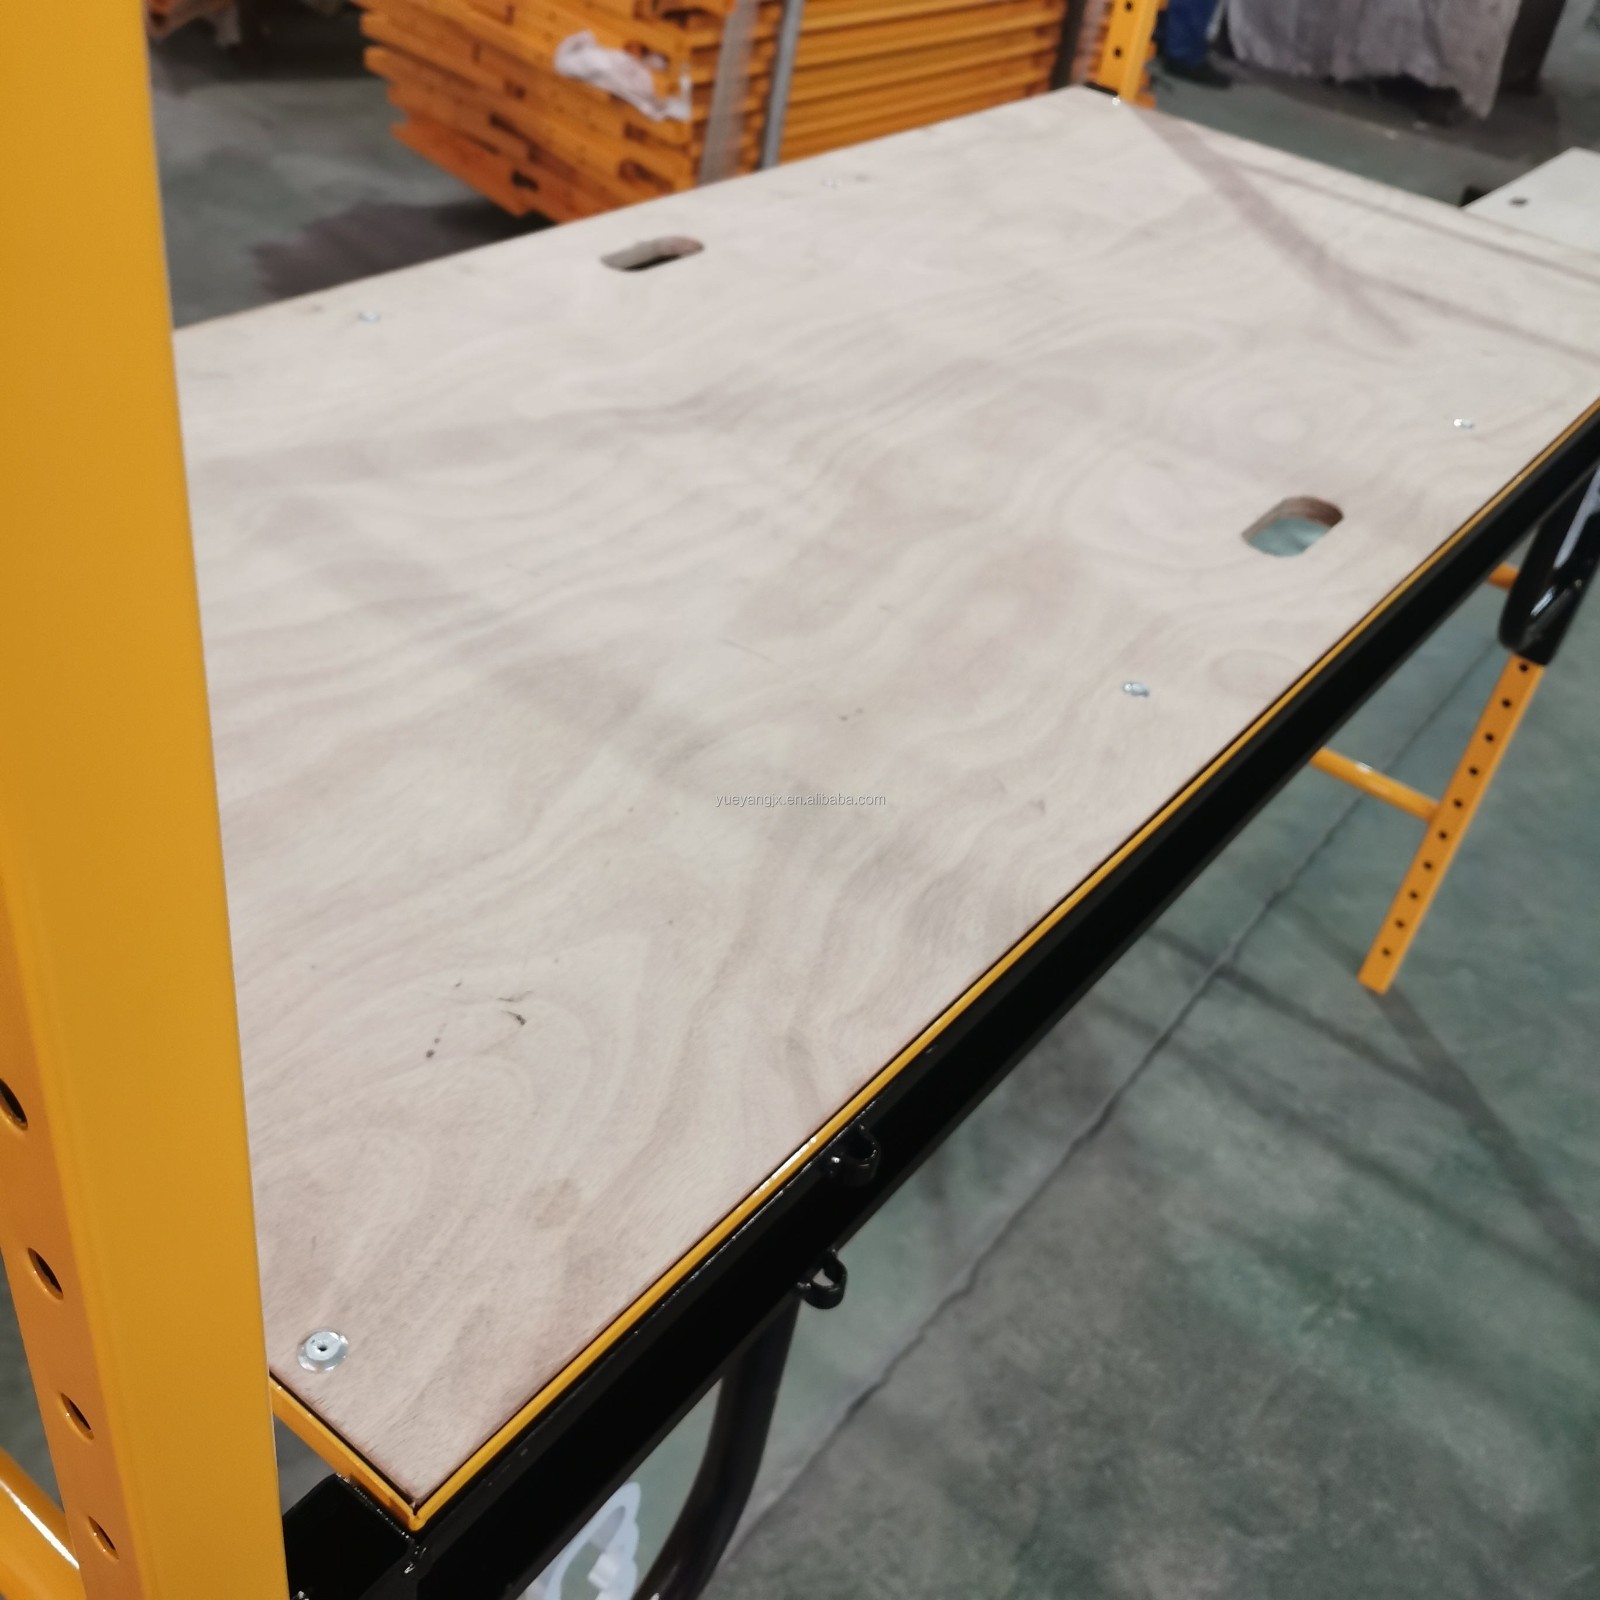 12mm thickness plywood platform with hand holes for easy hold